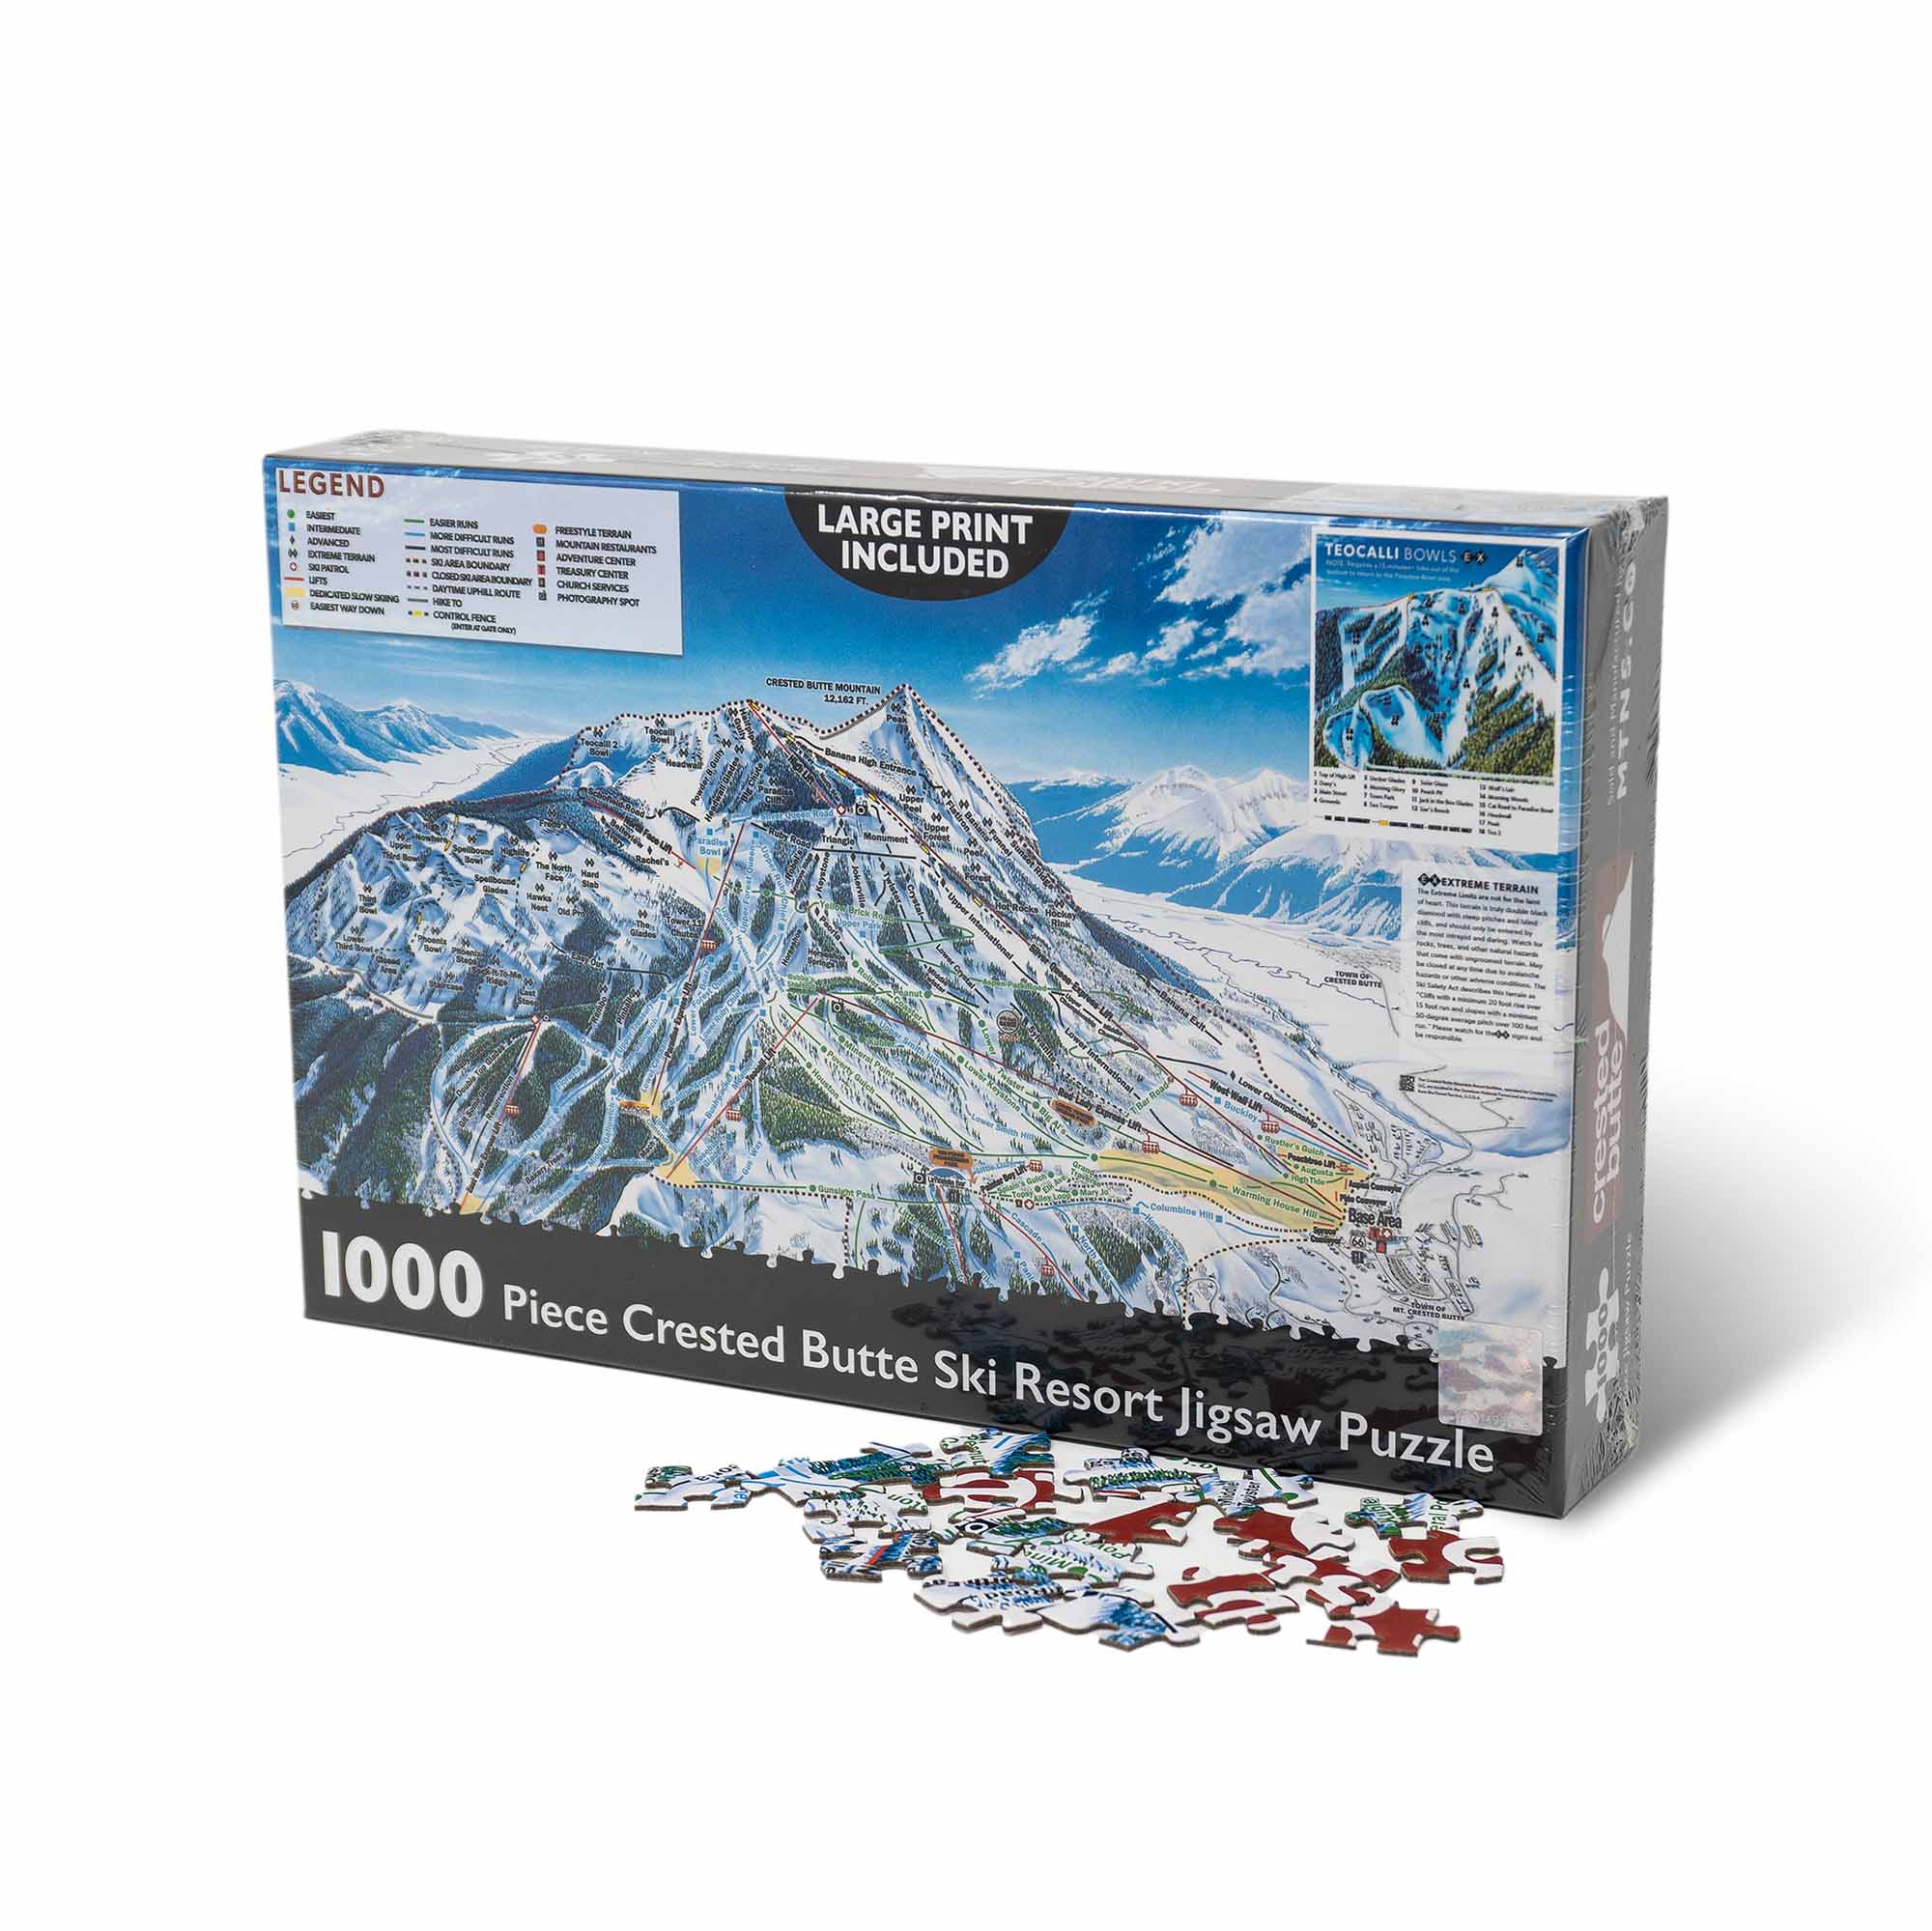 Crested Butte Ski Resort Jigsaw Puzzle – 1000 Pieces